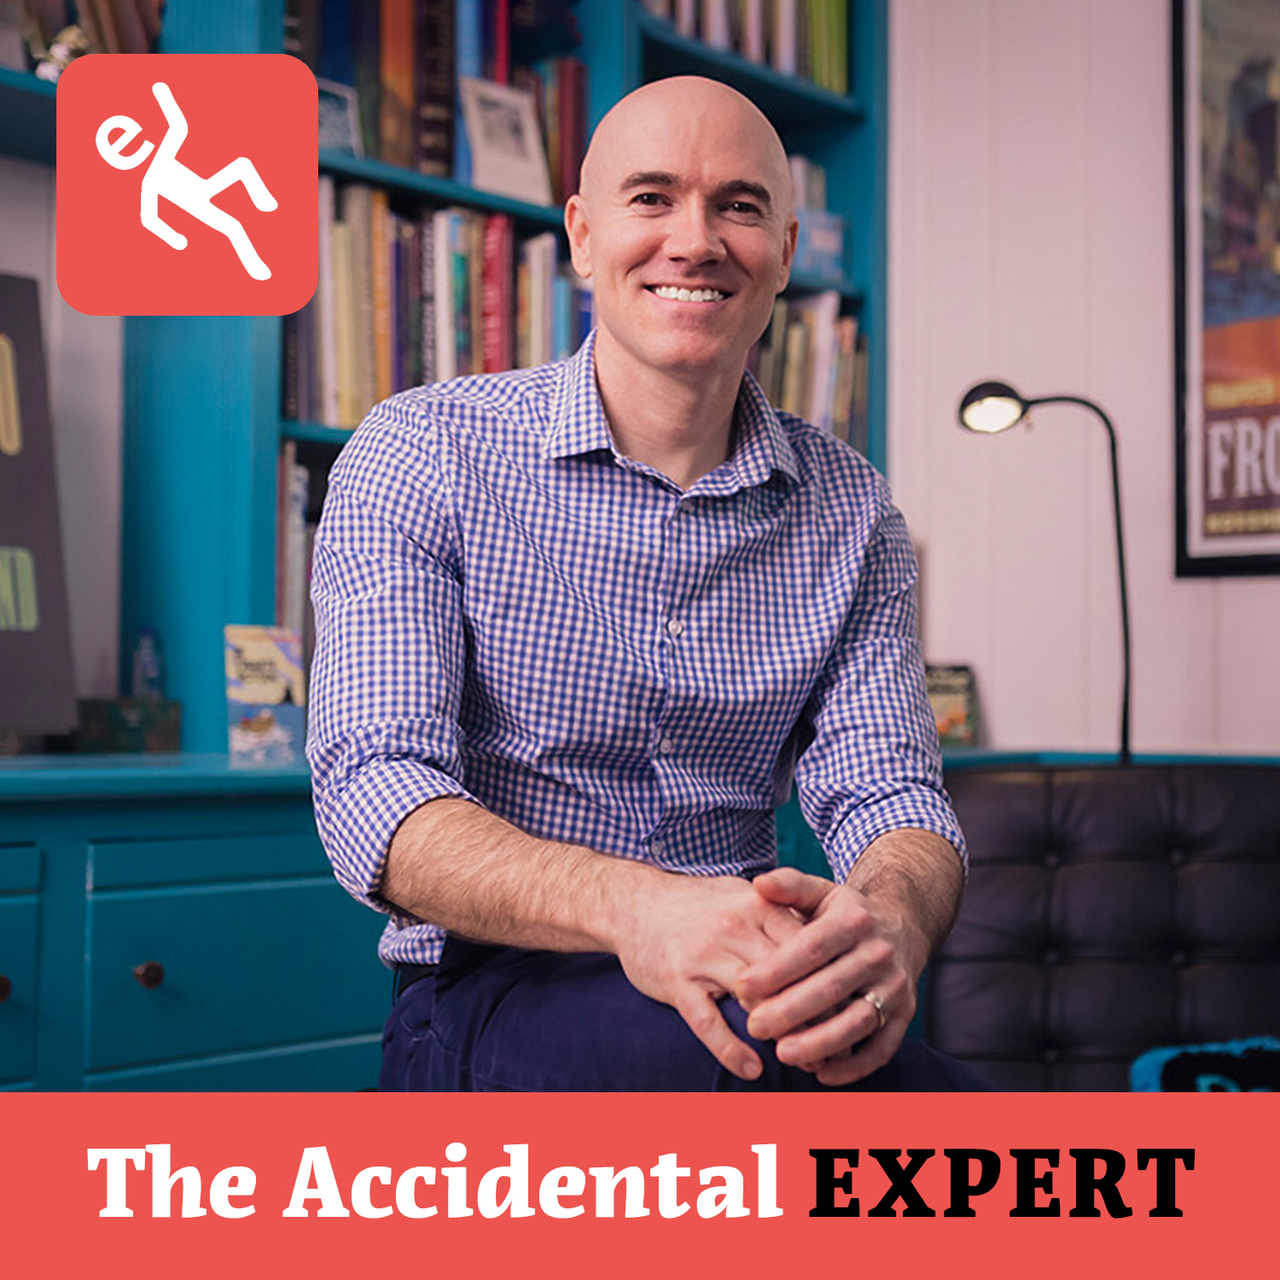 The Accidental Expert